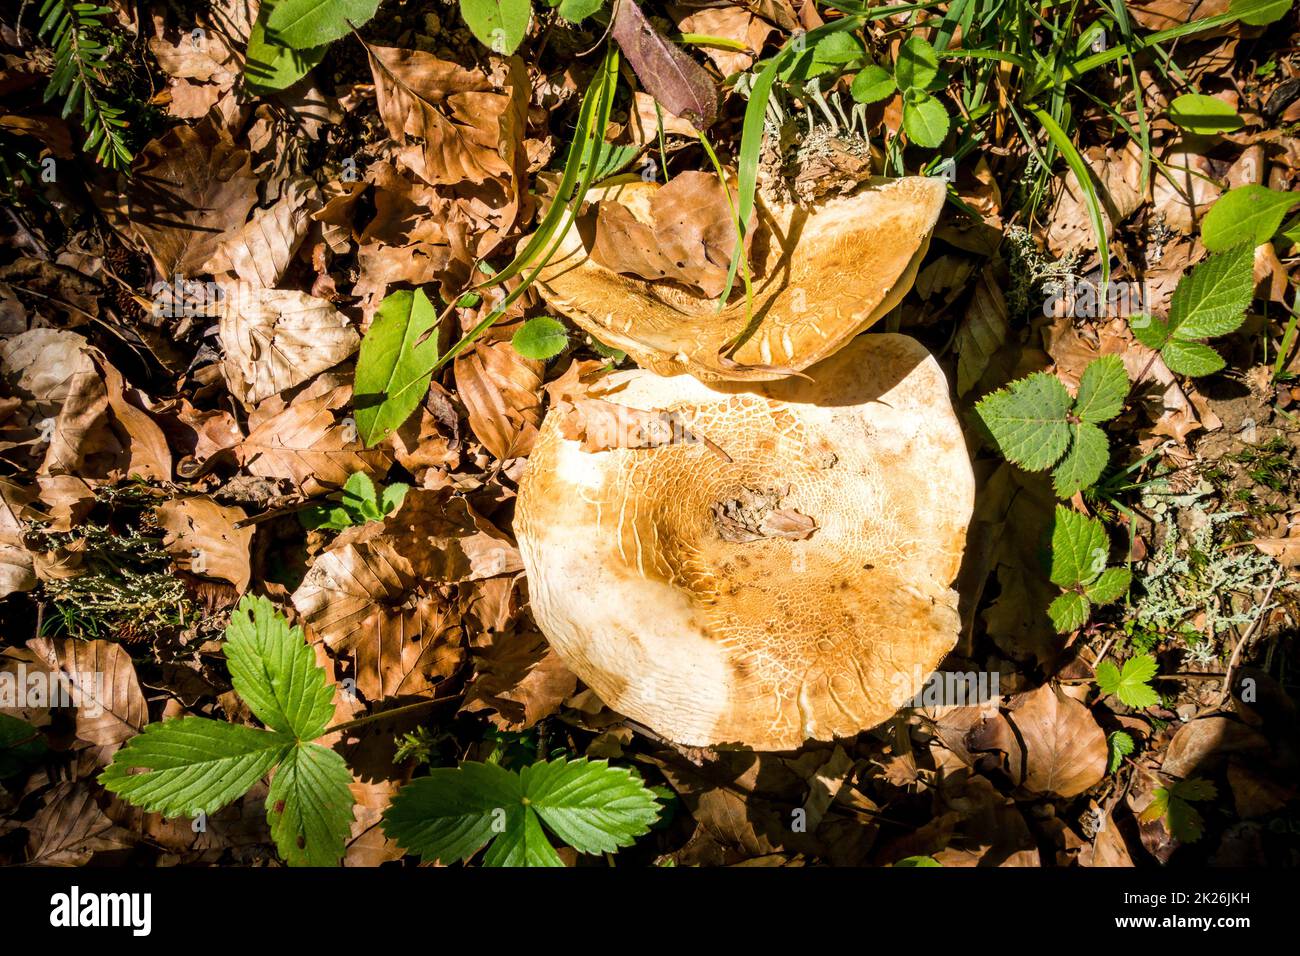 Mushroom closeup view in a forest Stock Photo